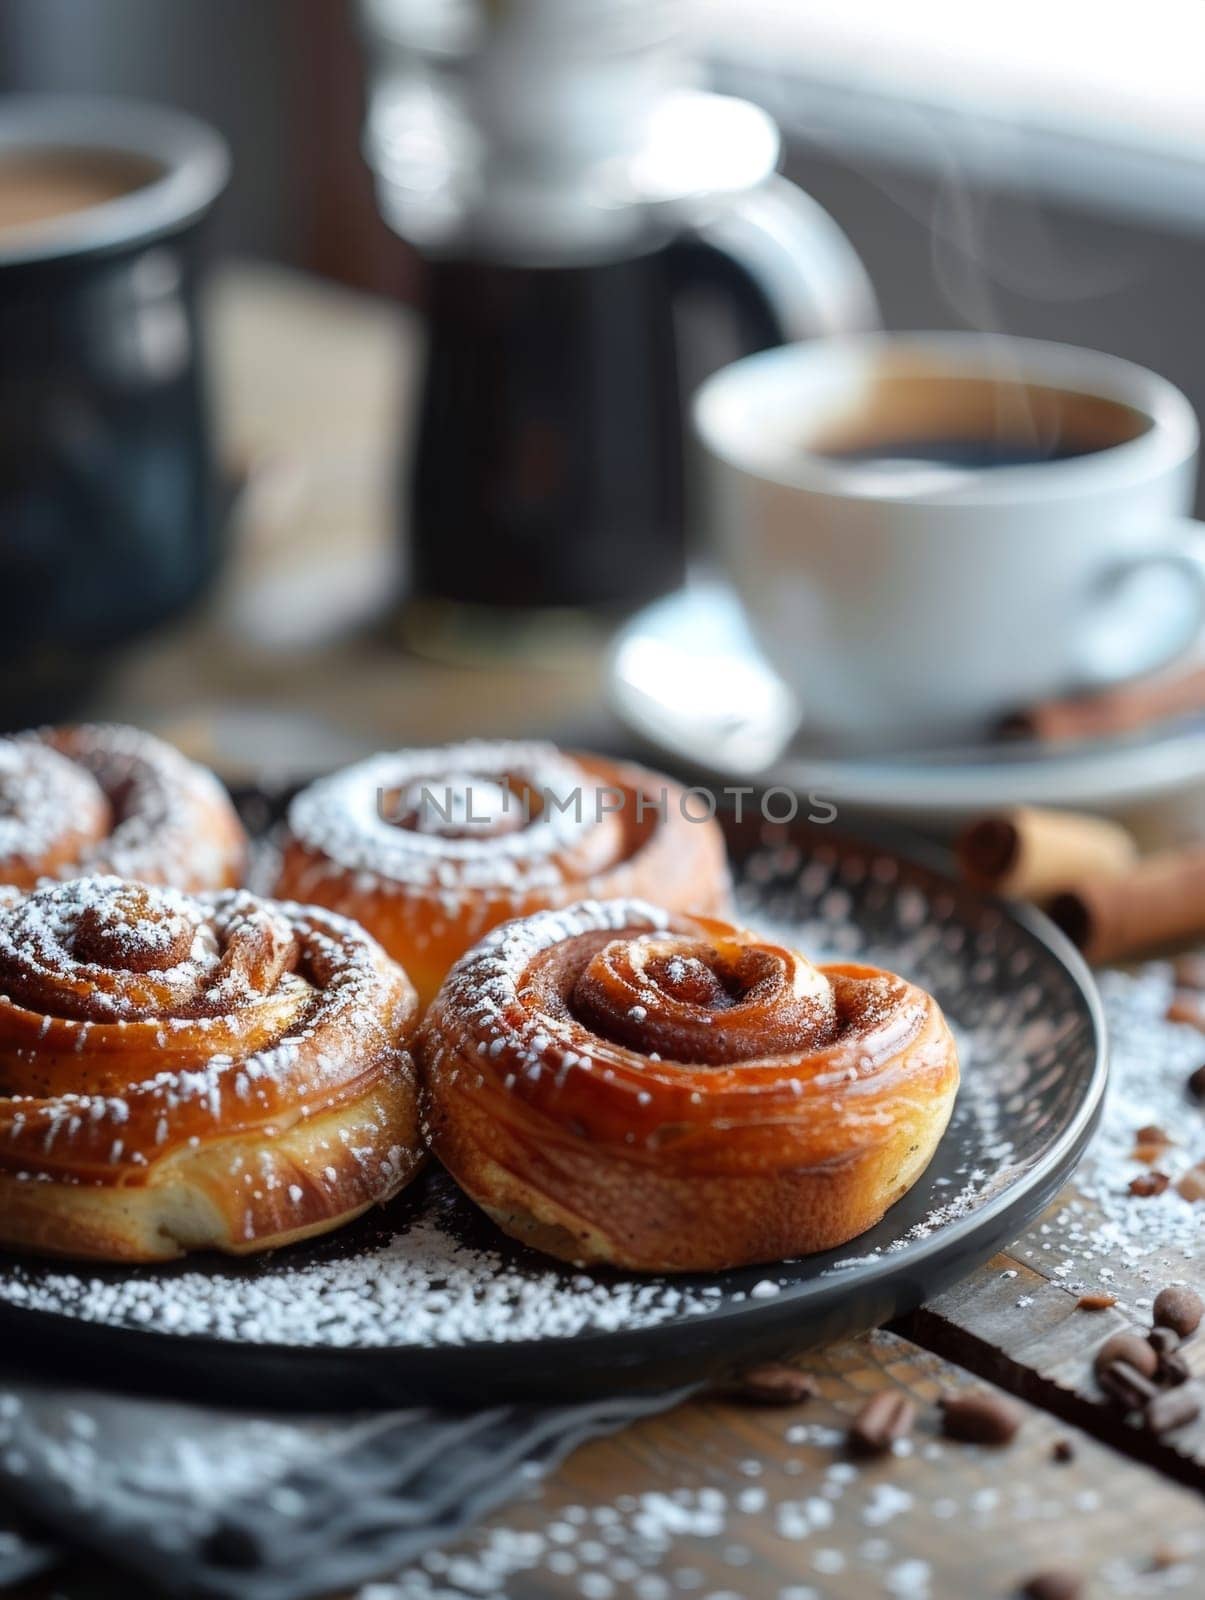 Finnish korvapuusti, freshly baked cinnamon rolls, presented on a cafe table. This traditional pastry showcases the comforting flavors and baking traditions of Finnish cuisine. by sfinks